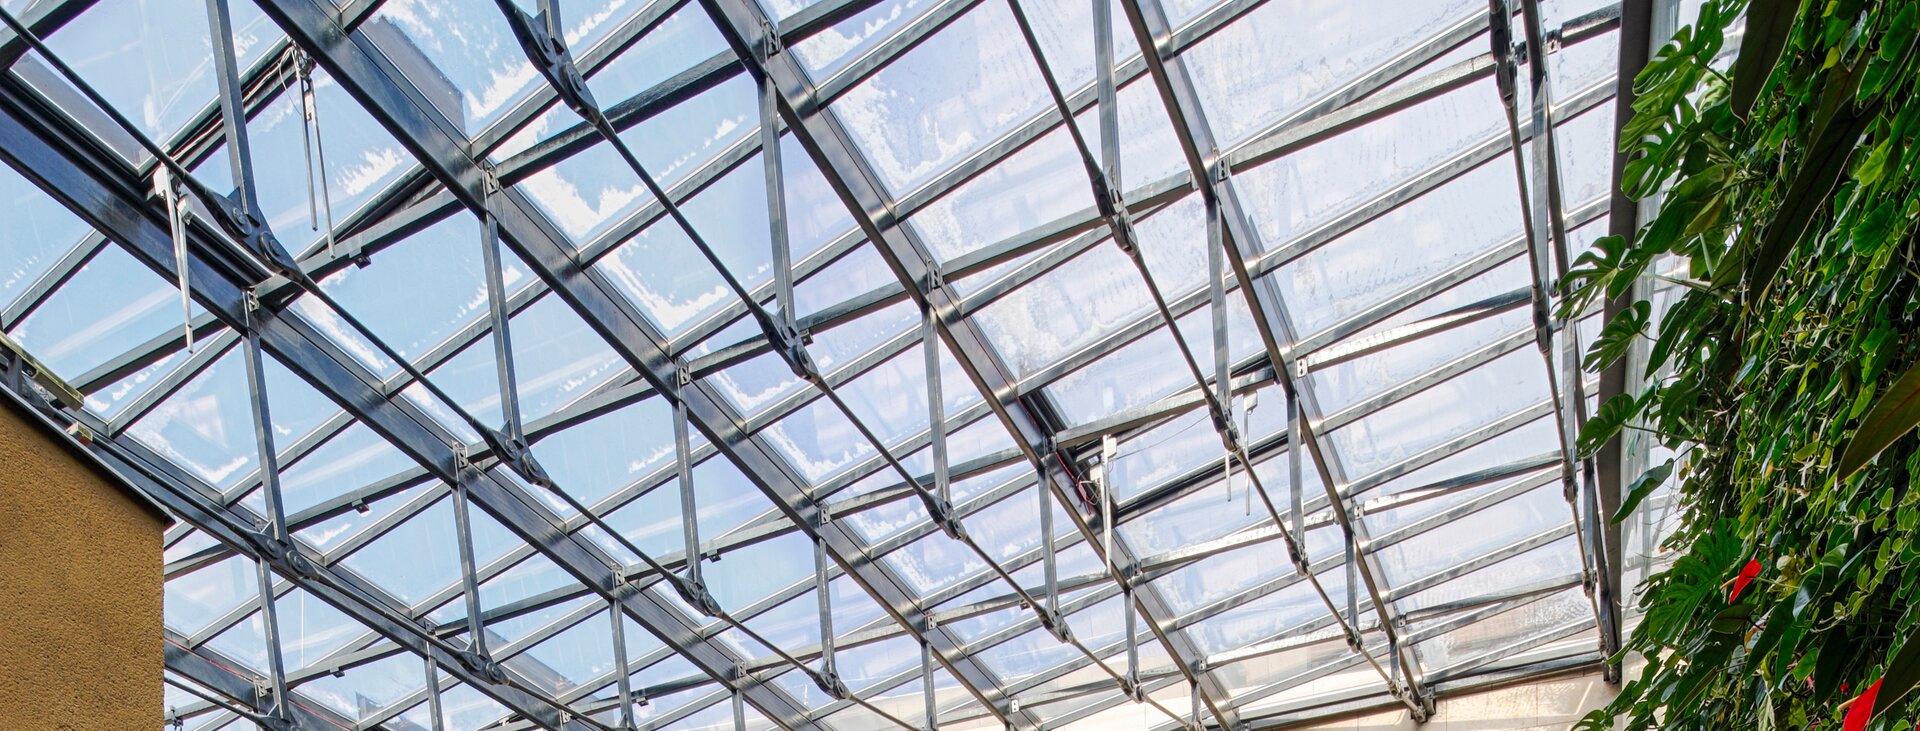 Light-flooded glass roof with metal struts and roof windows equipped with ZA drives